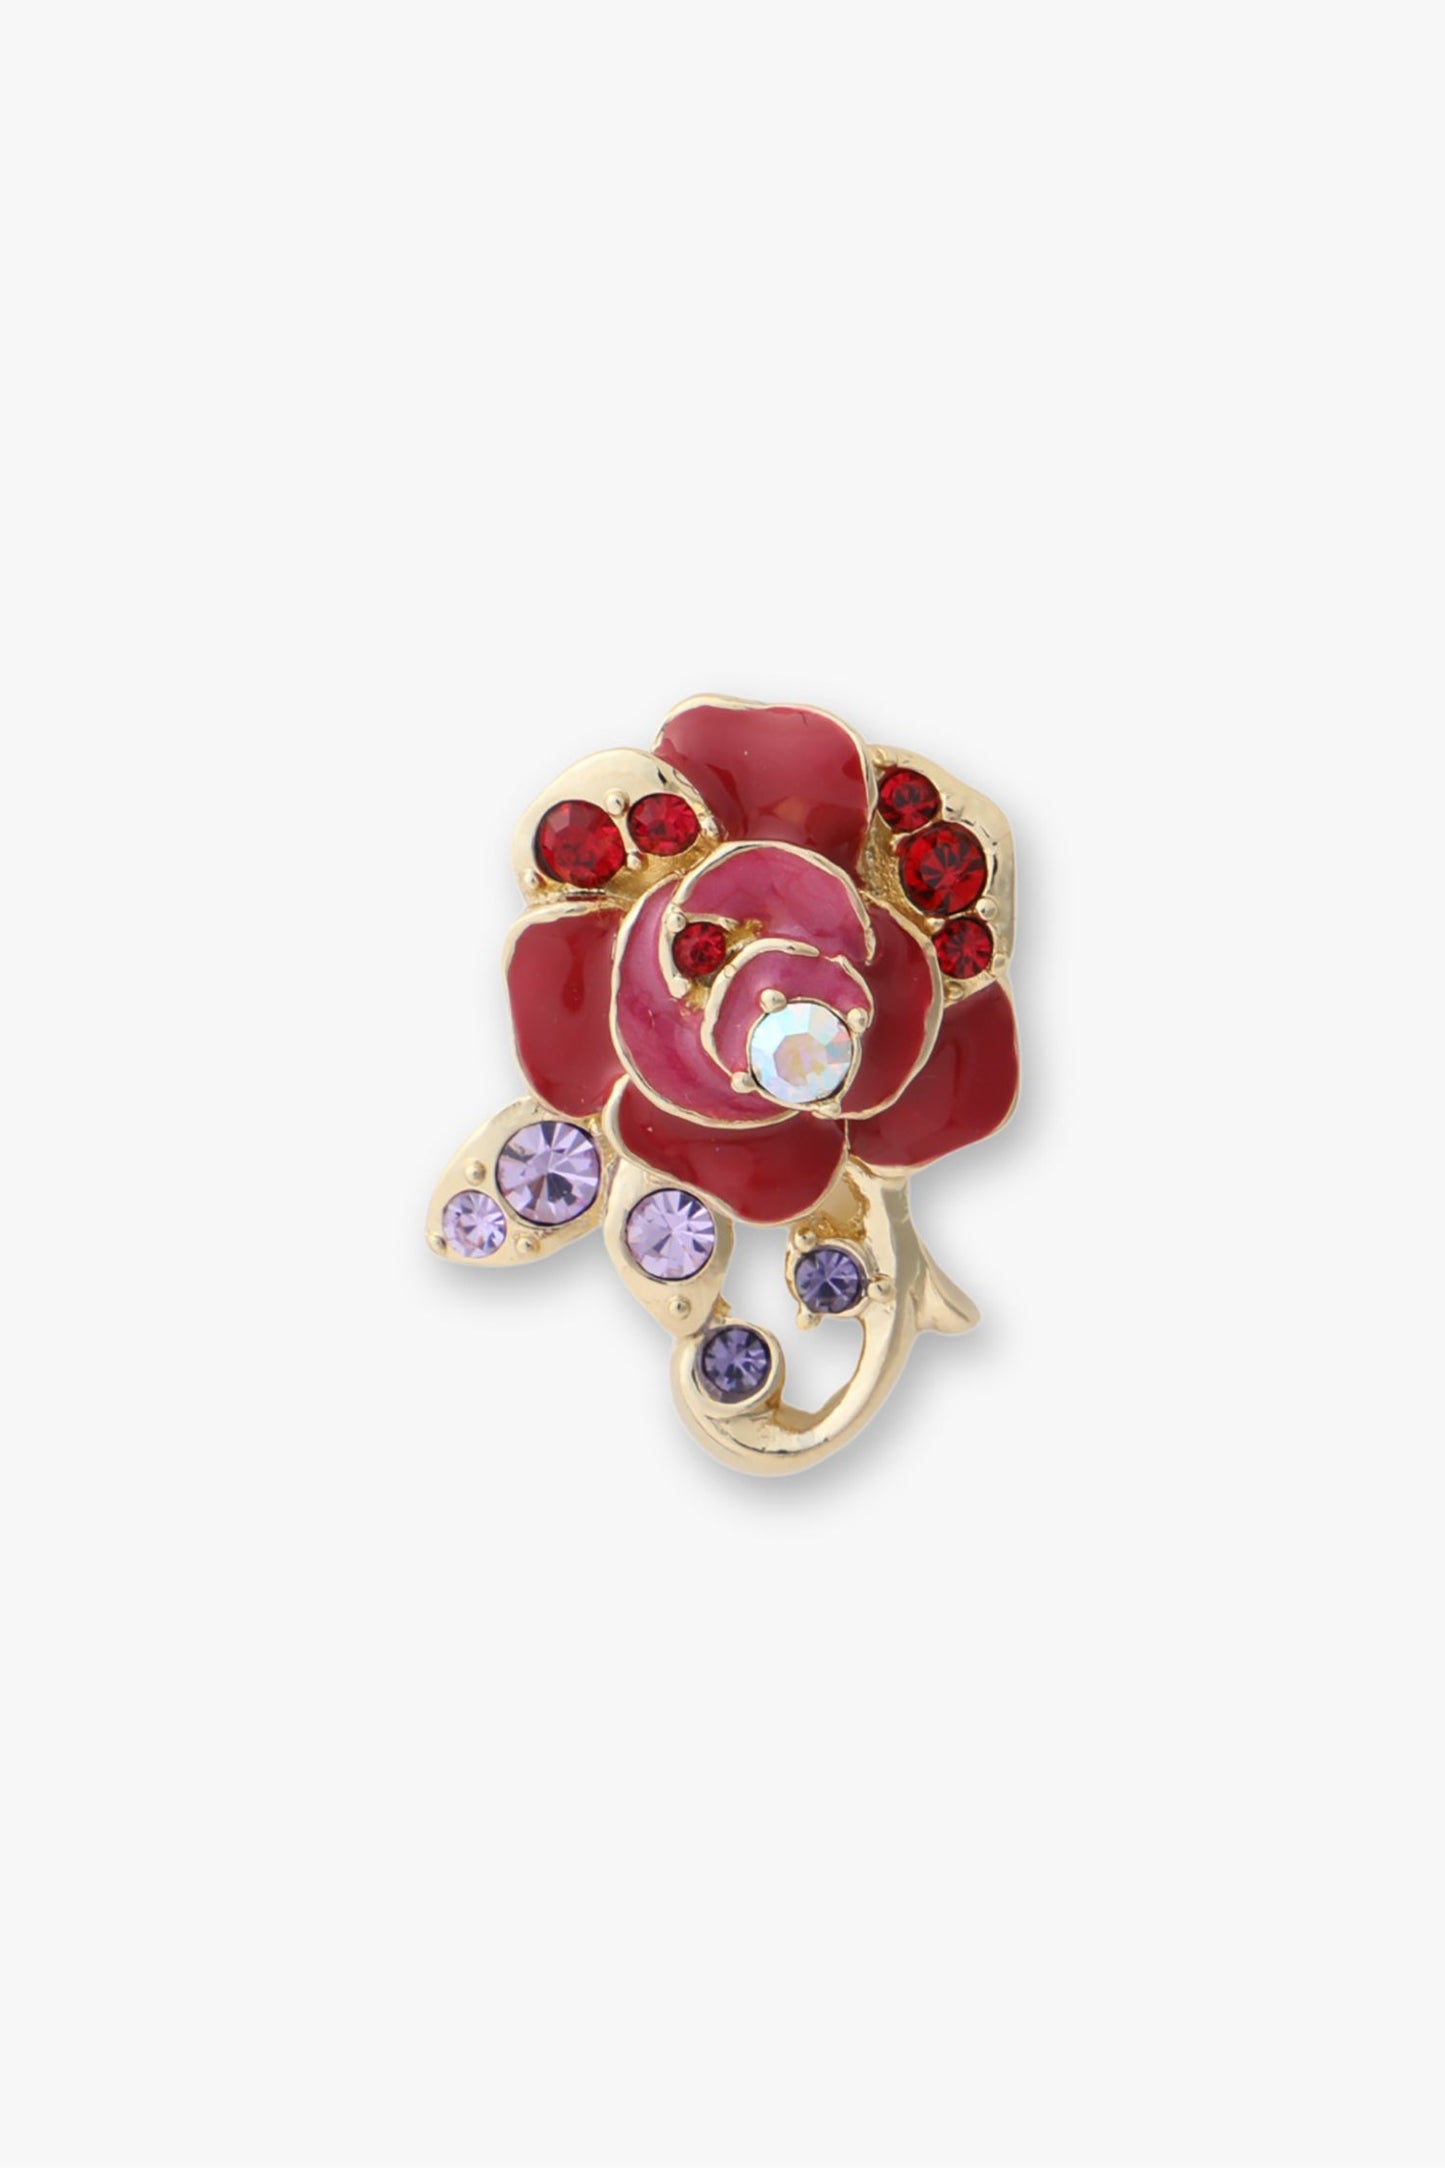 Rose Stud Earrings, Magenta, red Gems on top, white on the rose center, purple on gold and Gold floral Details